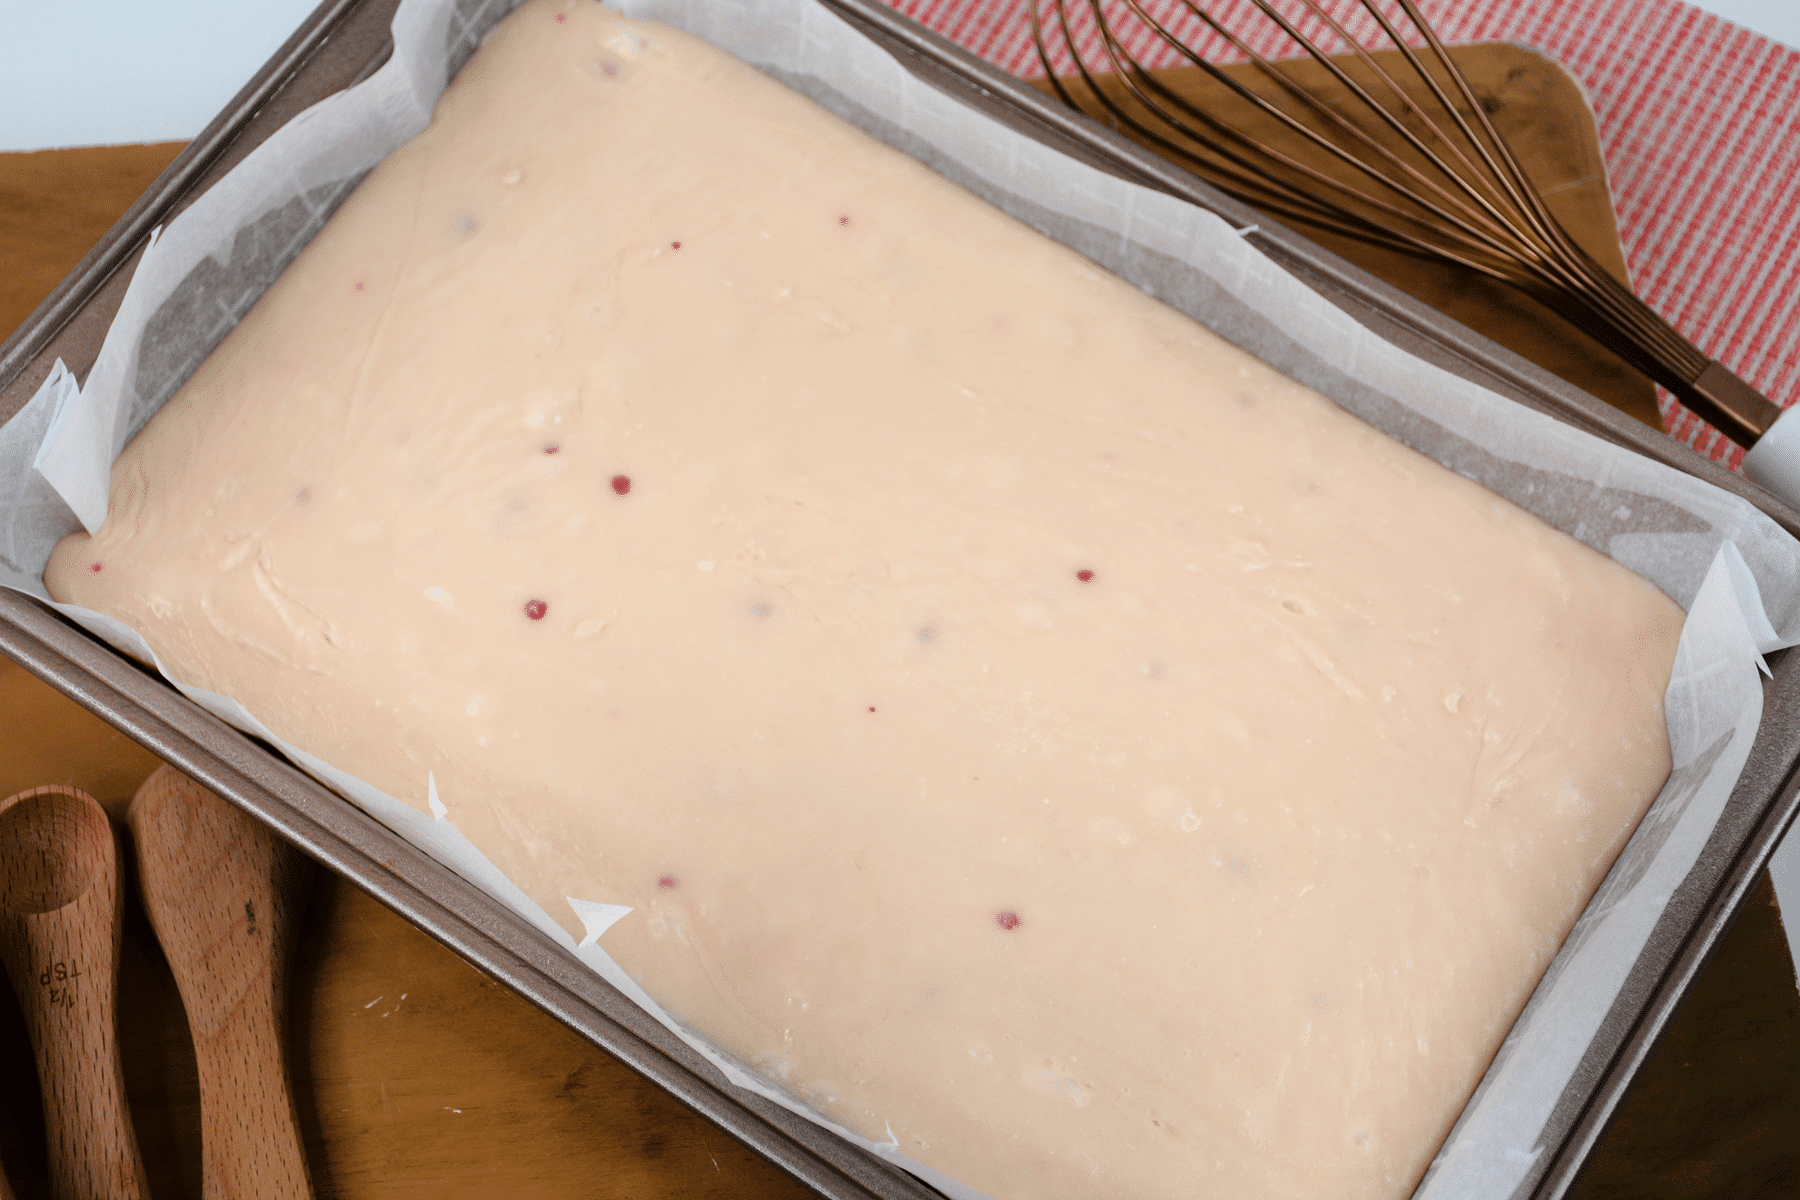 Next process in preparing White Chocolate Strawberry Fudge is to put strawberry fudge into the baking dish and spread evenly.